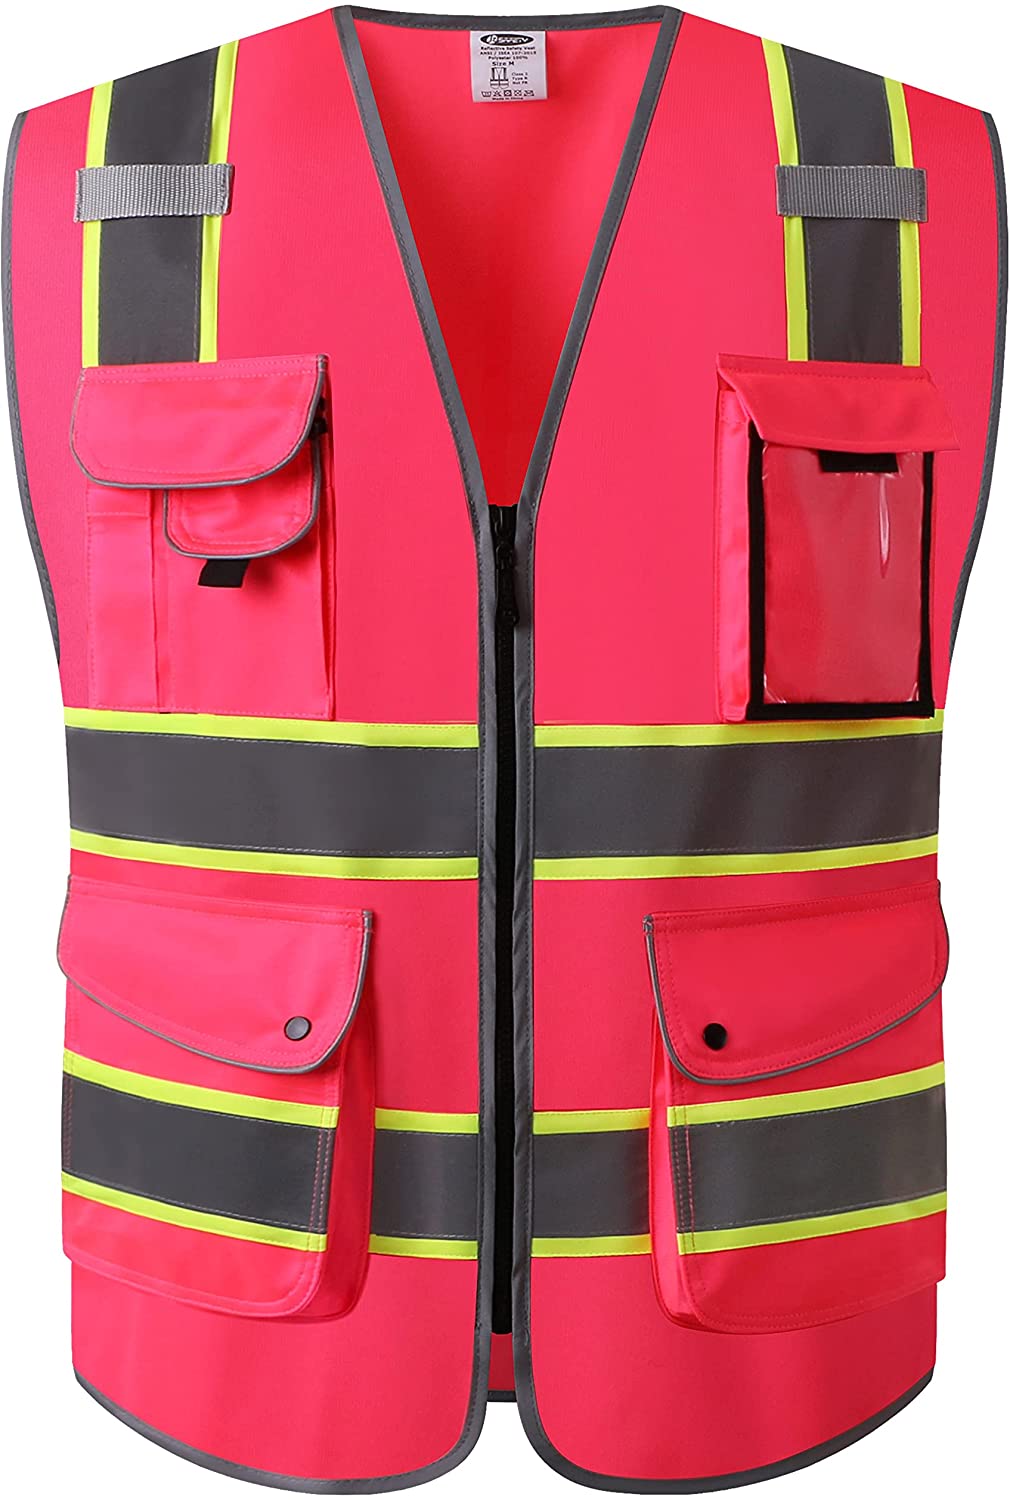 Safety Vest Black with Dual Tone High Reflective Strips Meets ANSI/ISEA Standard